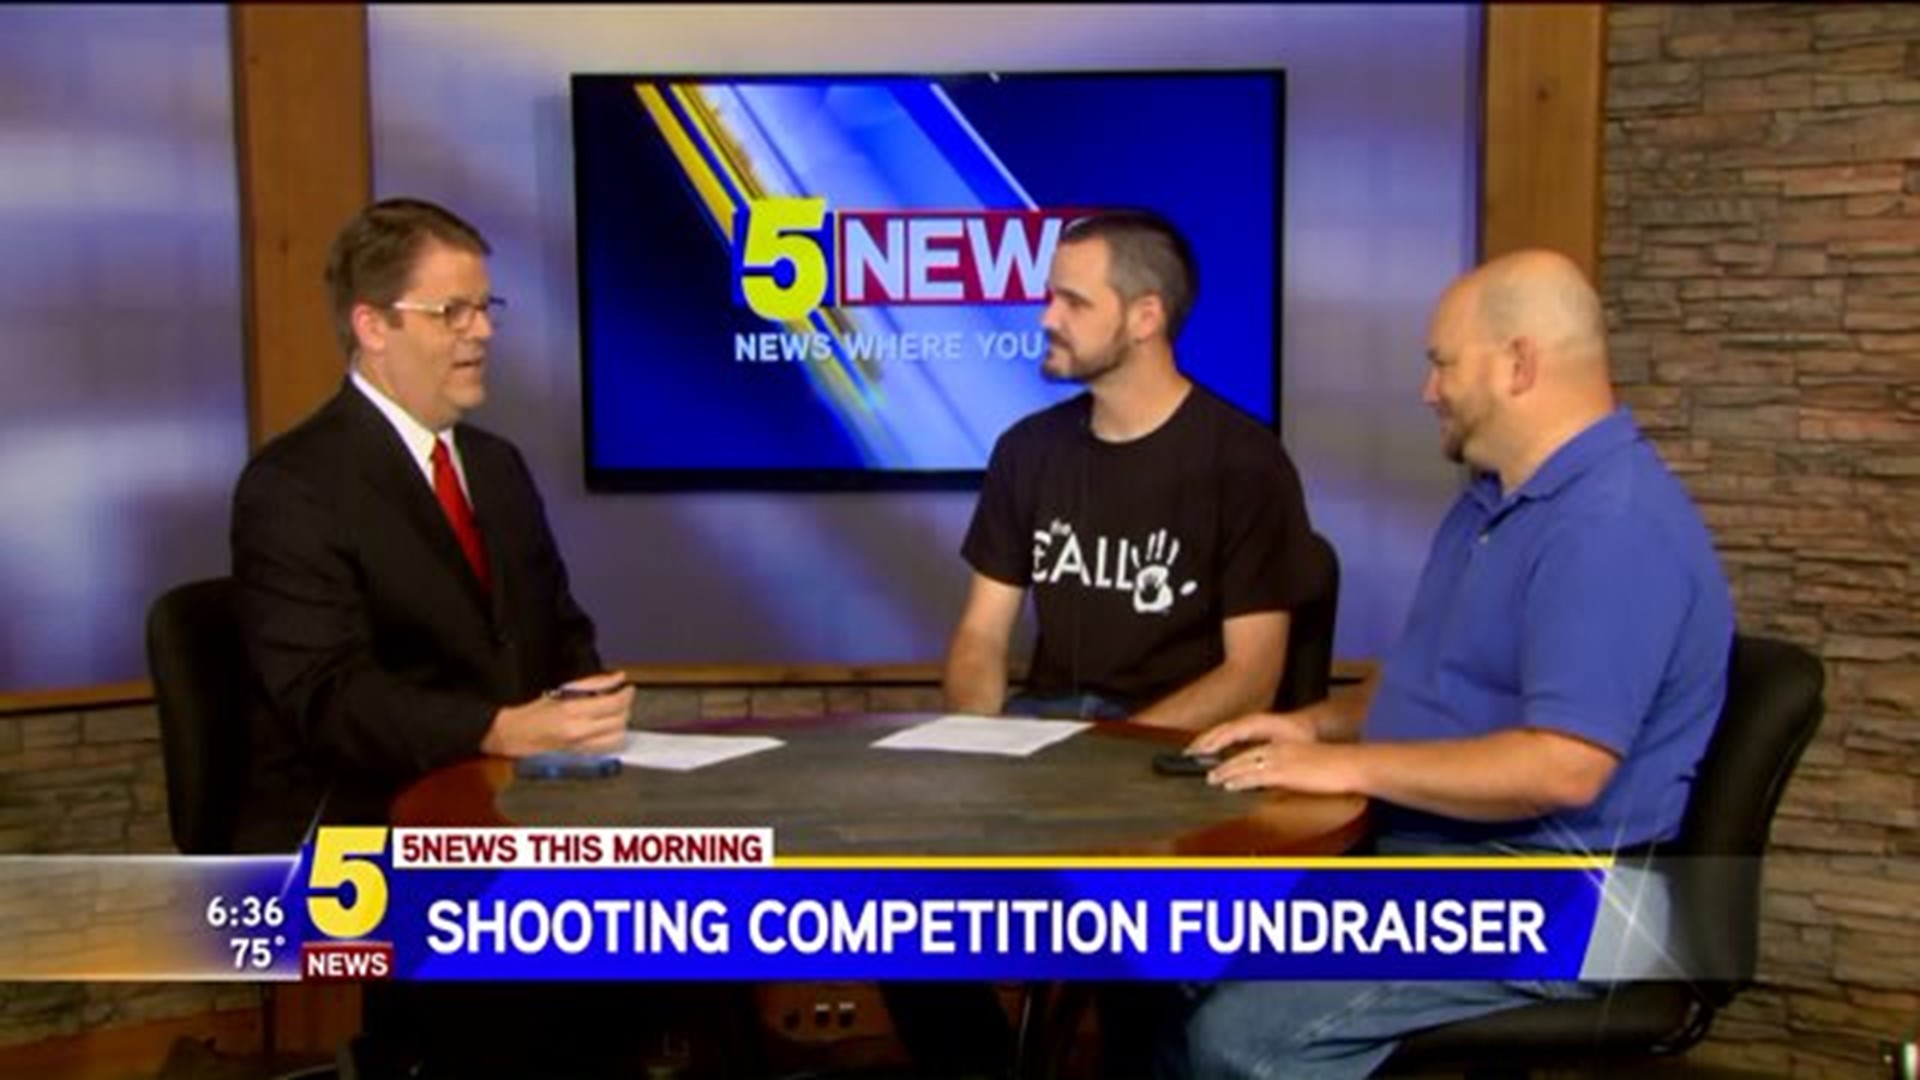 Shooting Competition Fundraiser